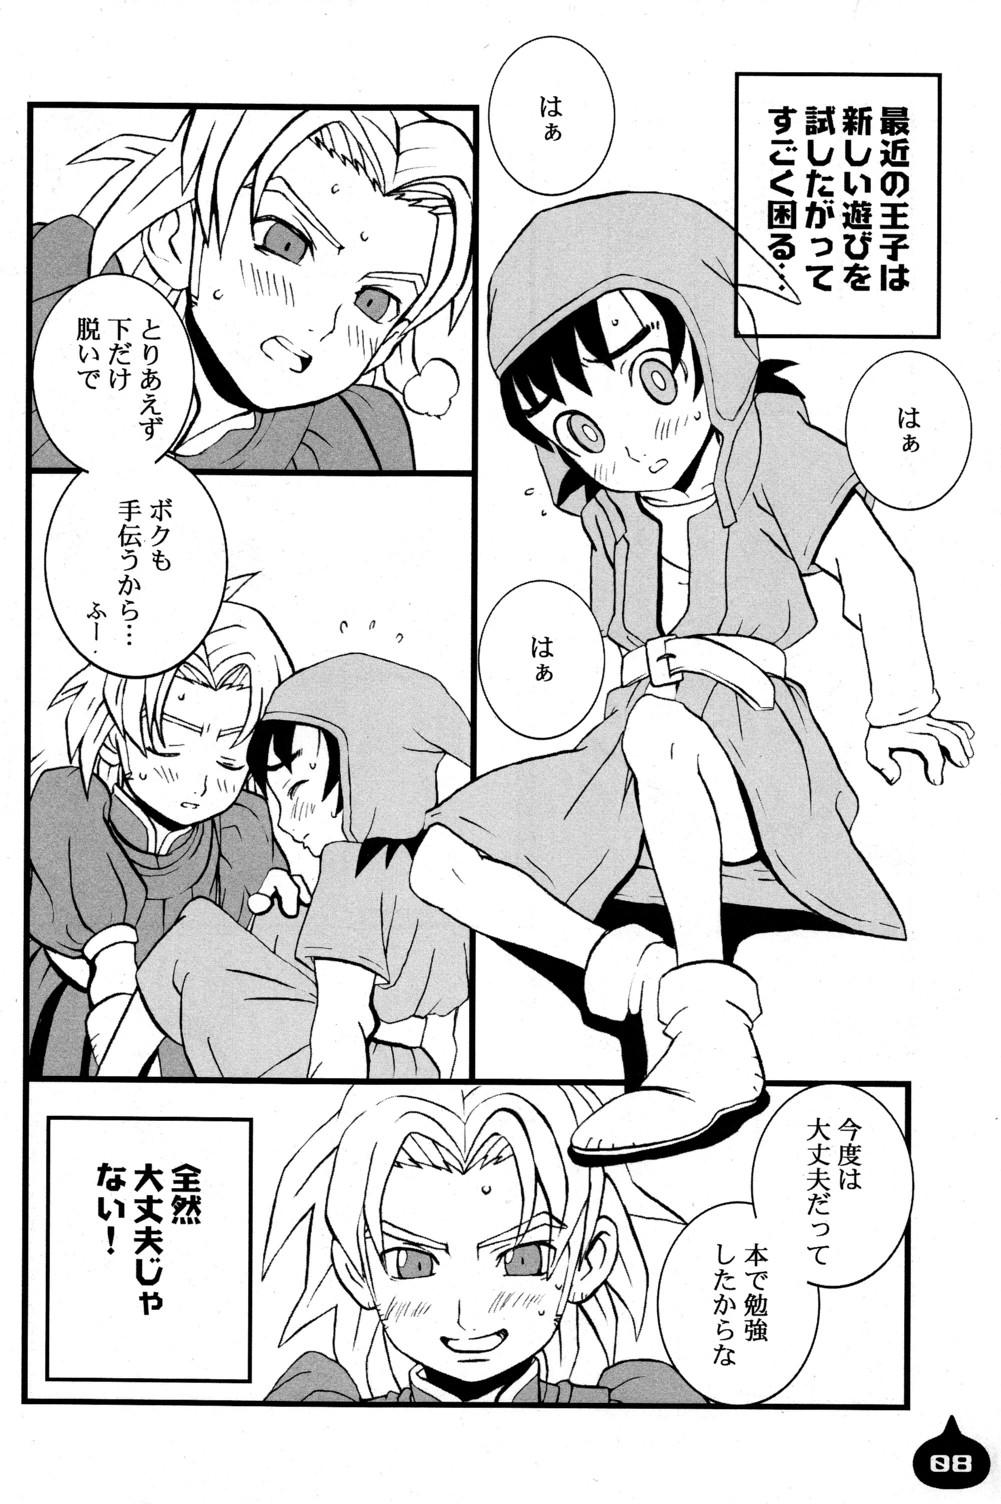 Anime LITTLE L - Dragon quest vii Lord of lords ryu knight | haou taikei ryuu knight Gay Deepthroat - Page 8